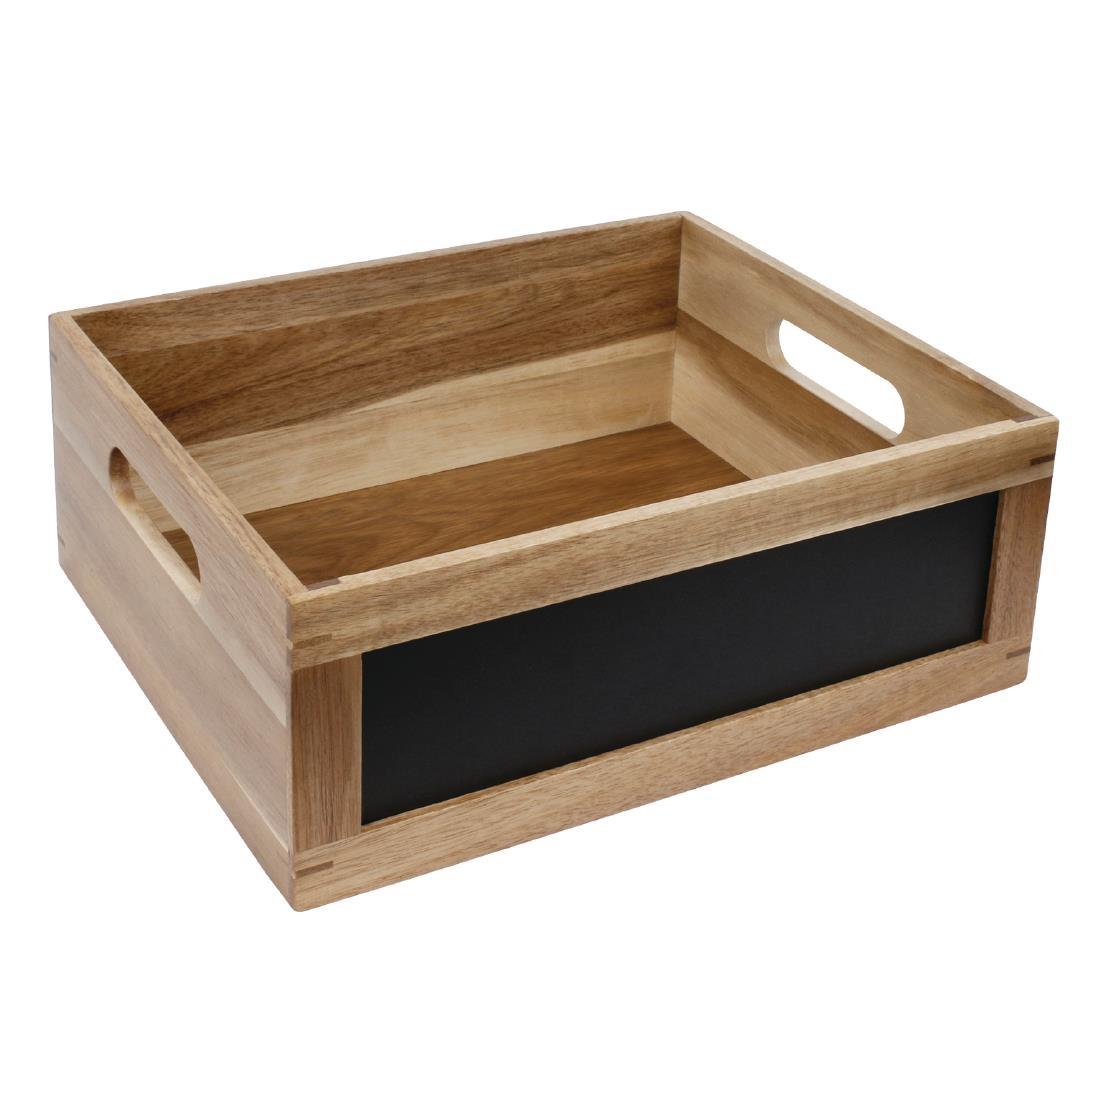 Olympia Bread Crate with Chalkboard 1/2 GN - CL191  - 1